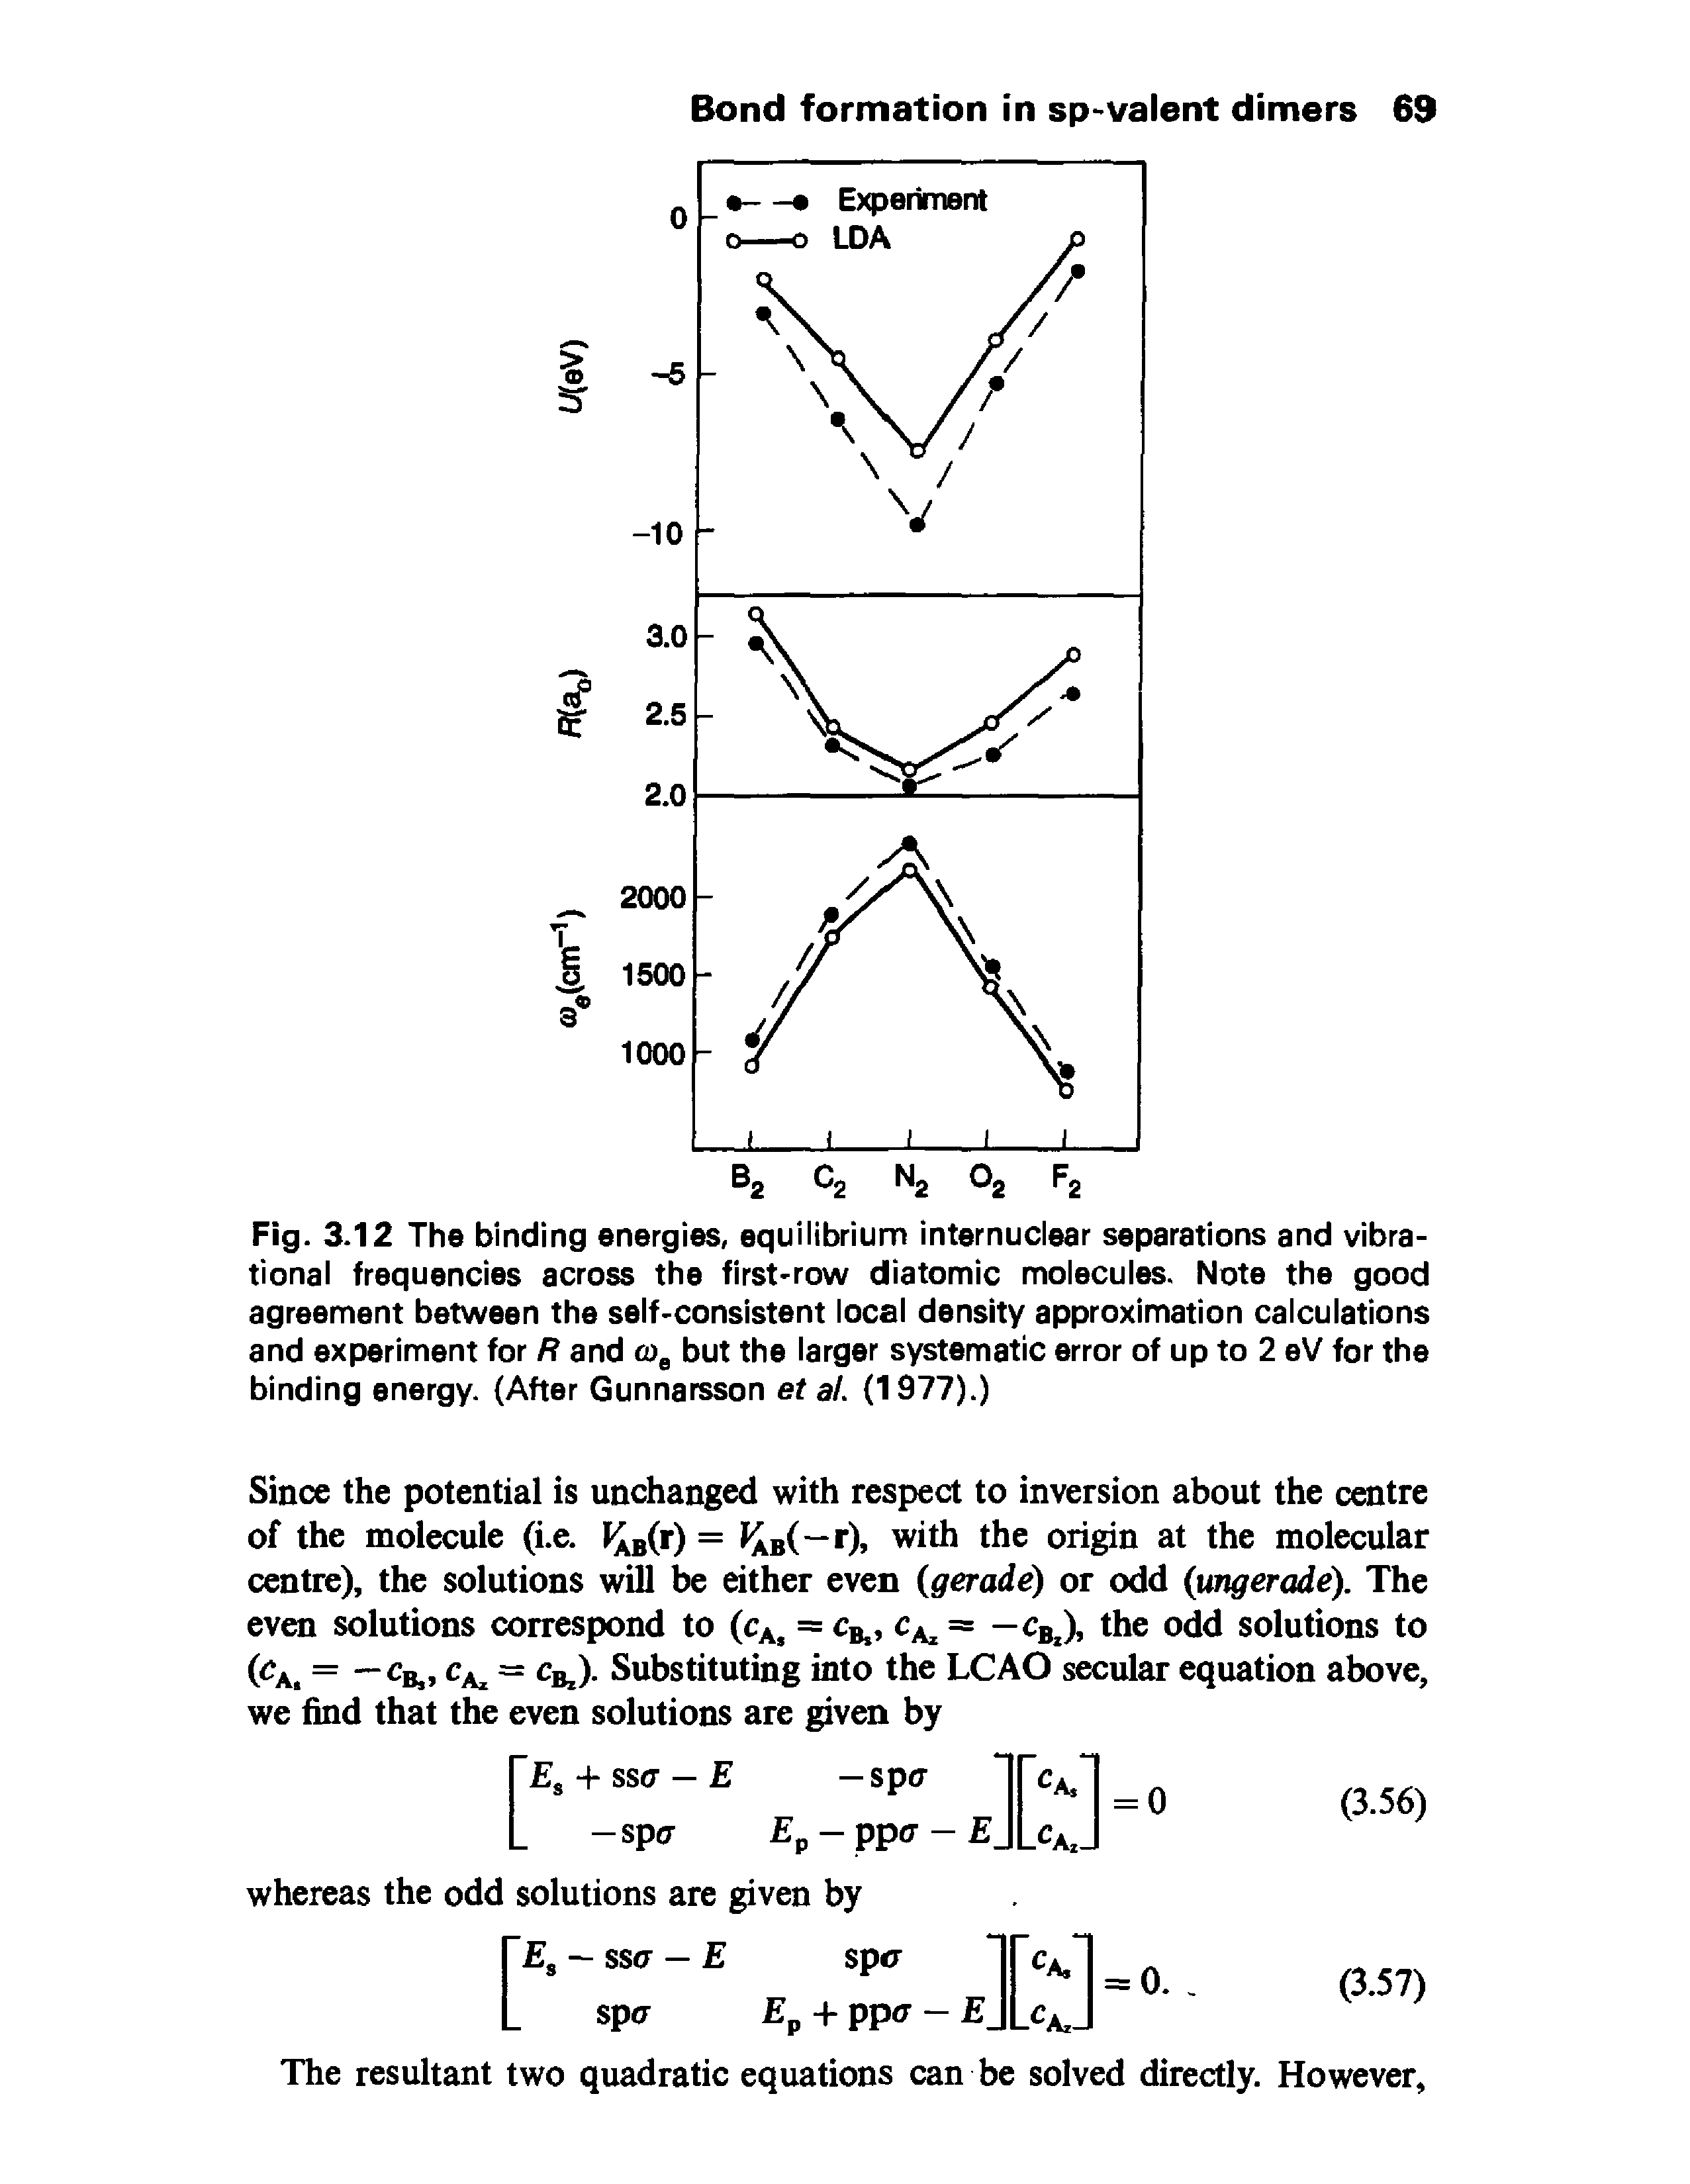 Fig. 3.12 The binding energies, equilibrium internuclear separations and vibrational frequencies across the first-row diatomic molecules. Note the good agreement between the self-consistent local density approximation calculations and experiment for R and coe but the larger systematic error of up to 2 eV for the binding energy. (After Gunnarsson et aL (1977).)...